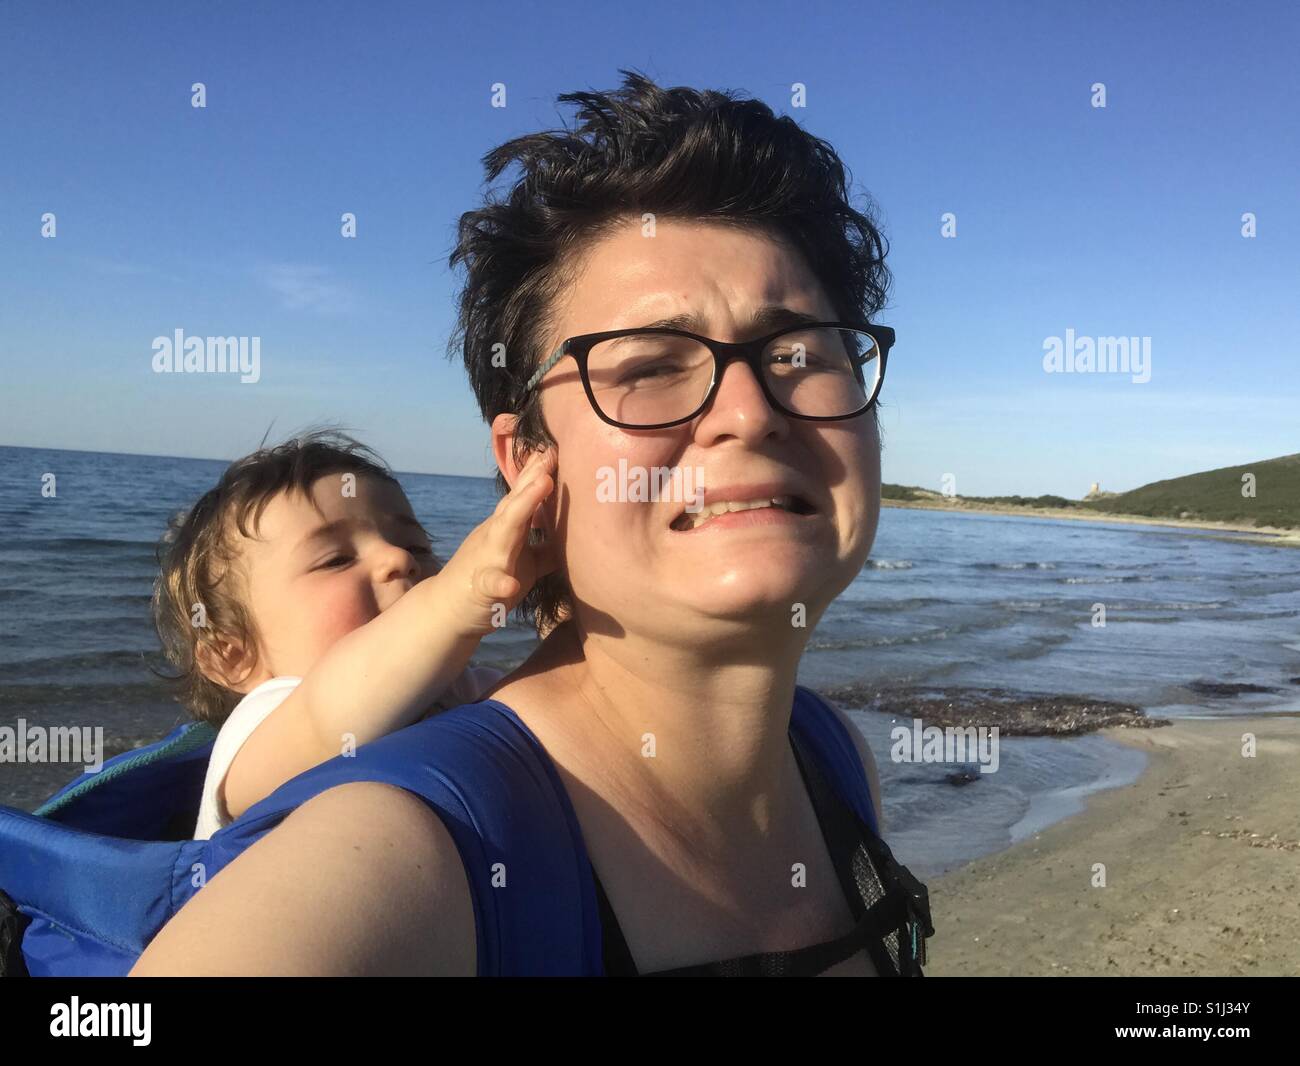 Selfie portrait of mother and baby on the beach Stock Photo